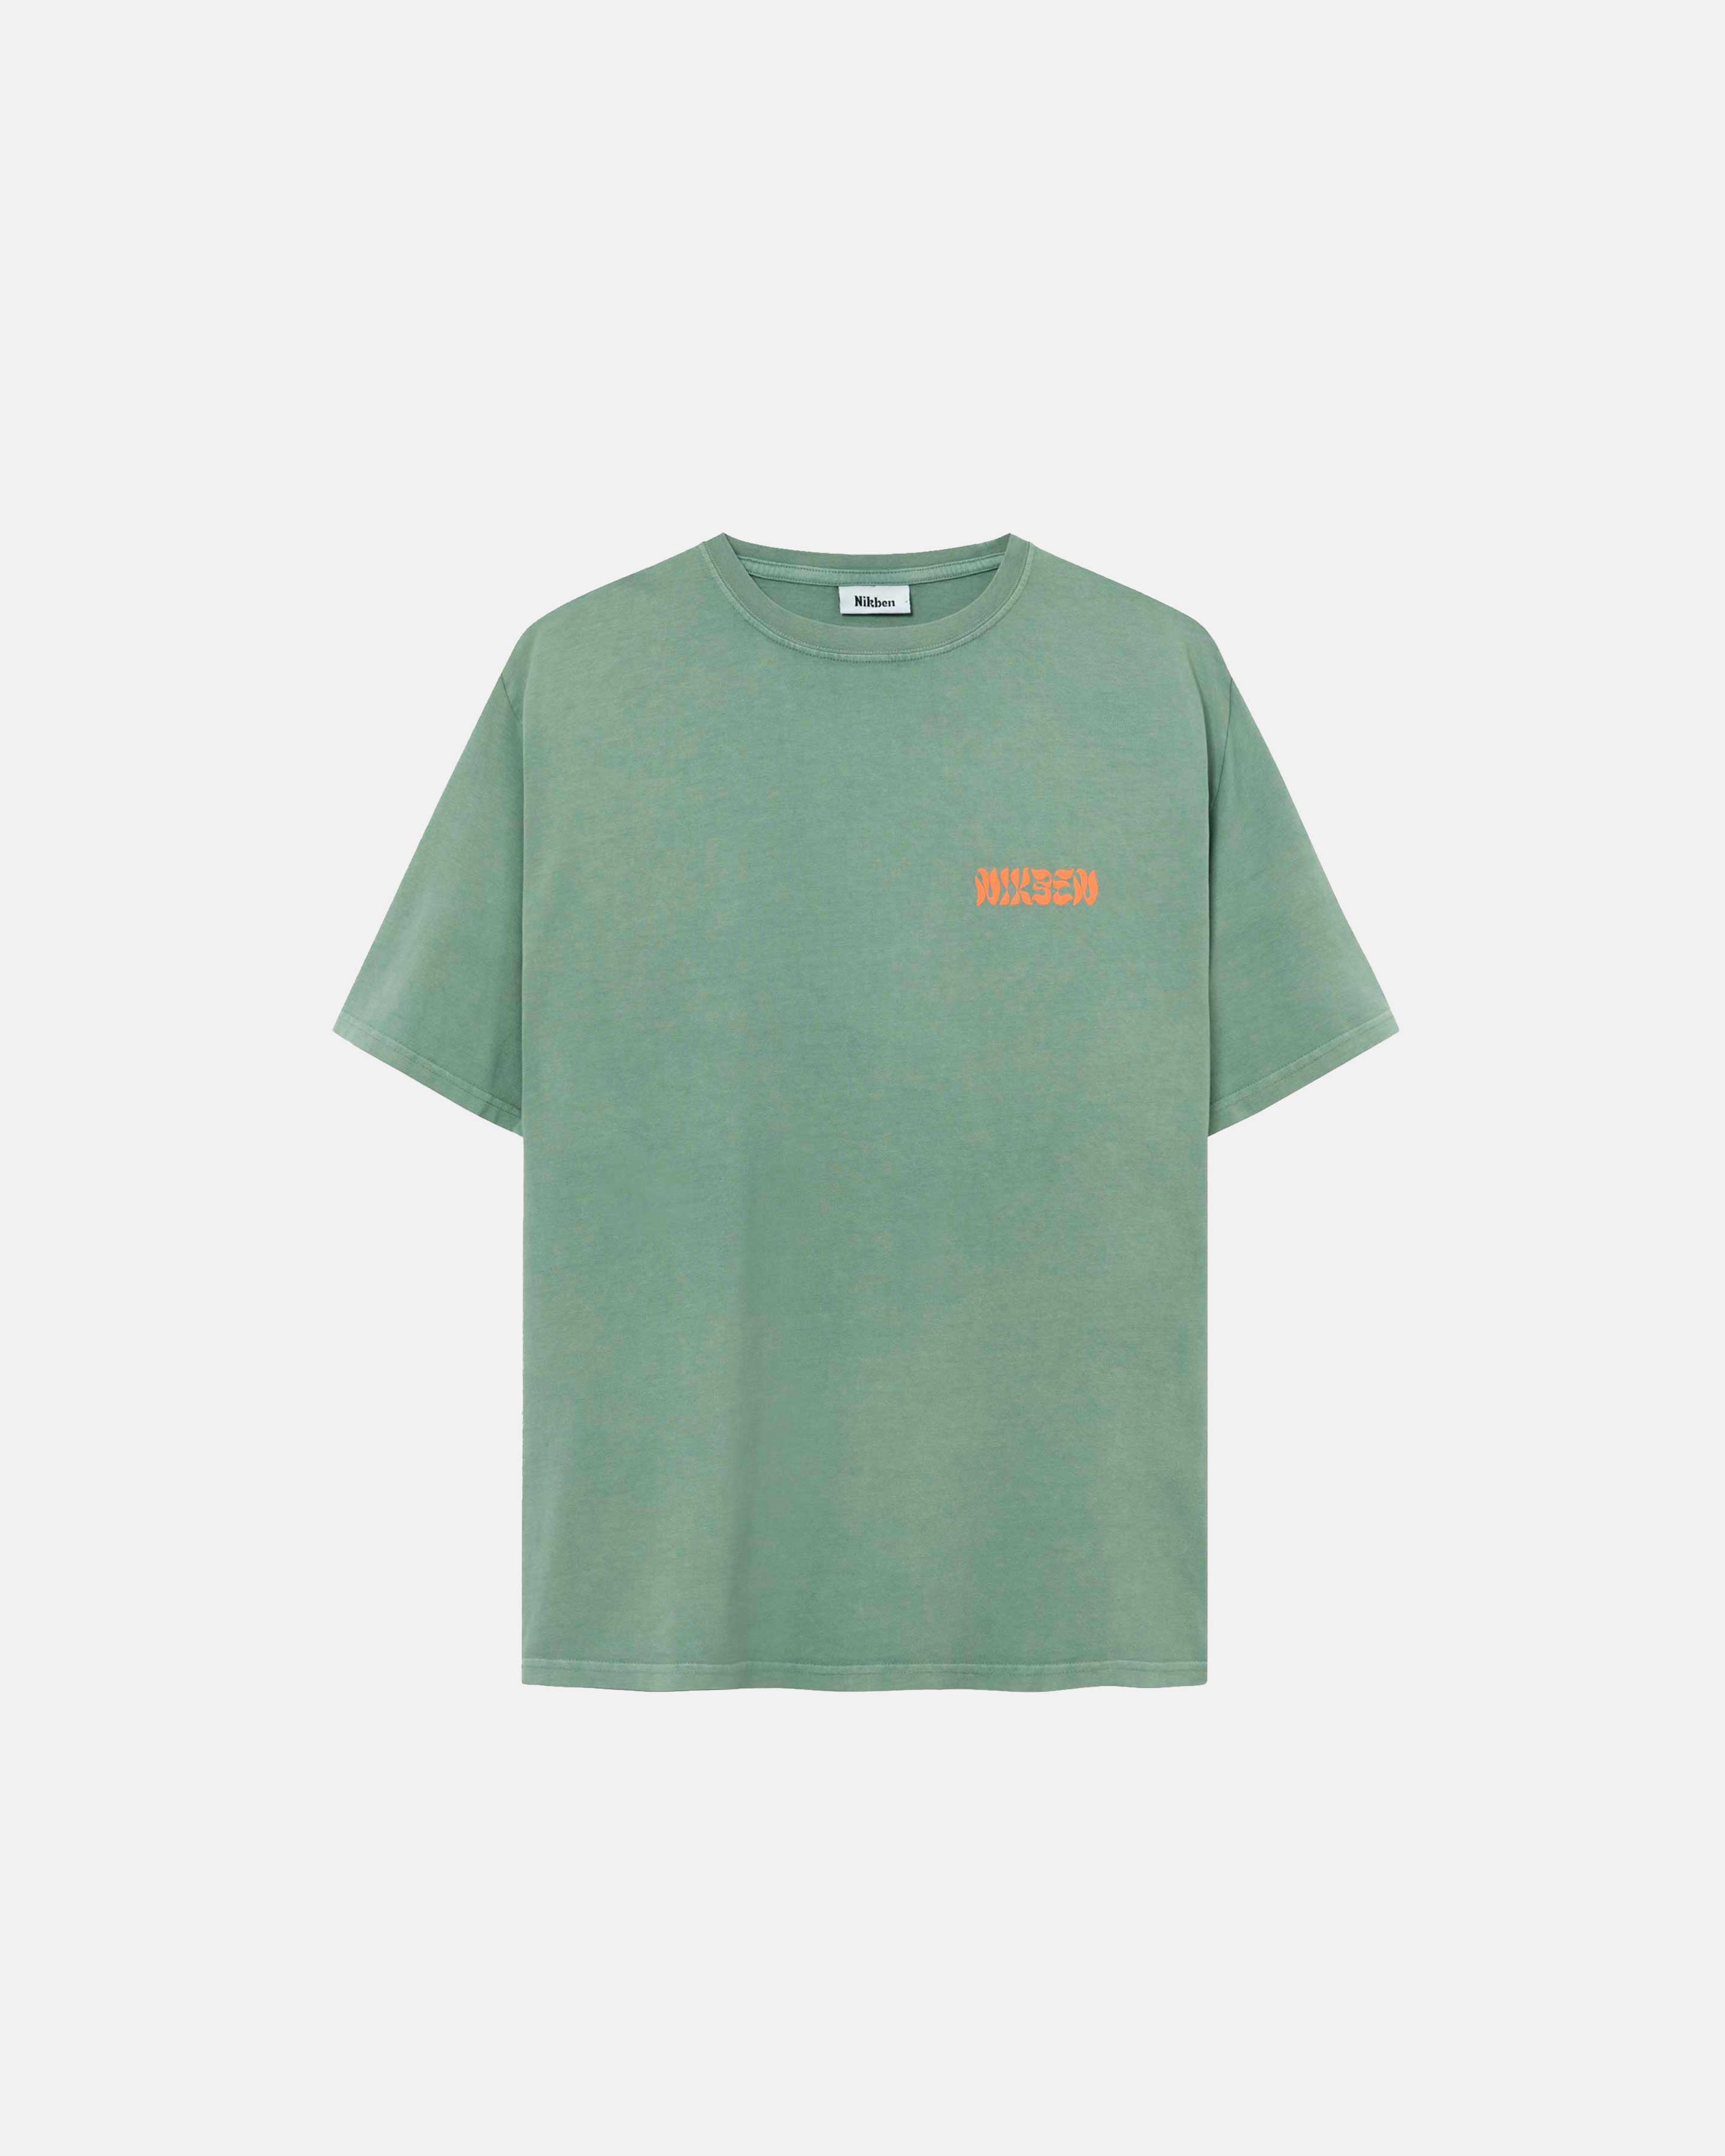 Green t-shirt with orange puffy "nikben" logo on the chest.